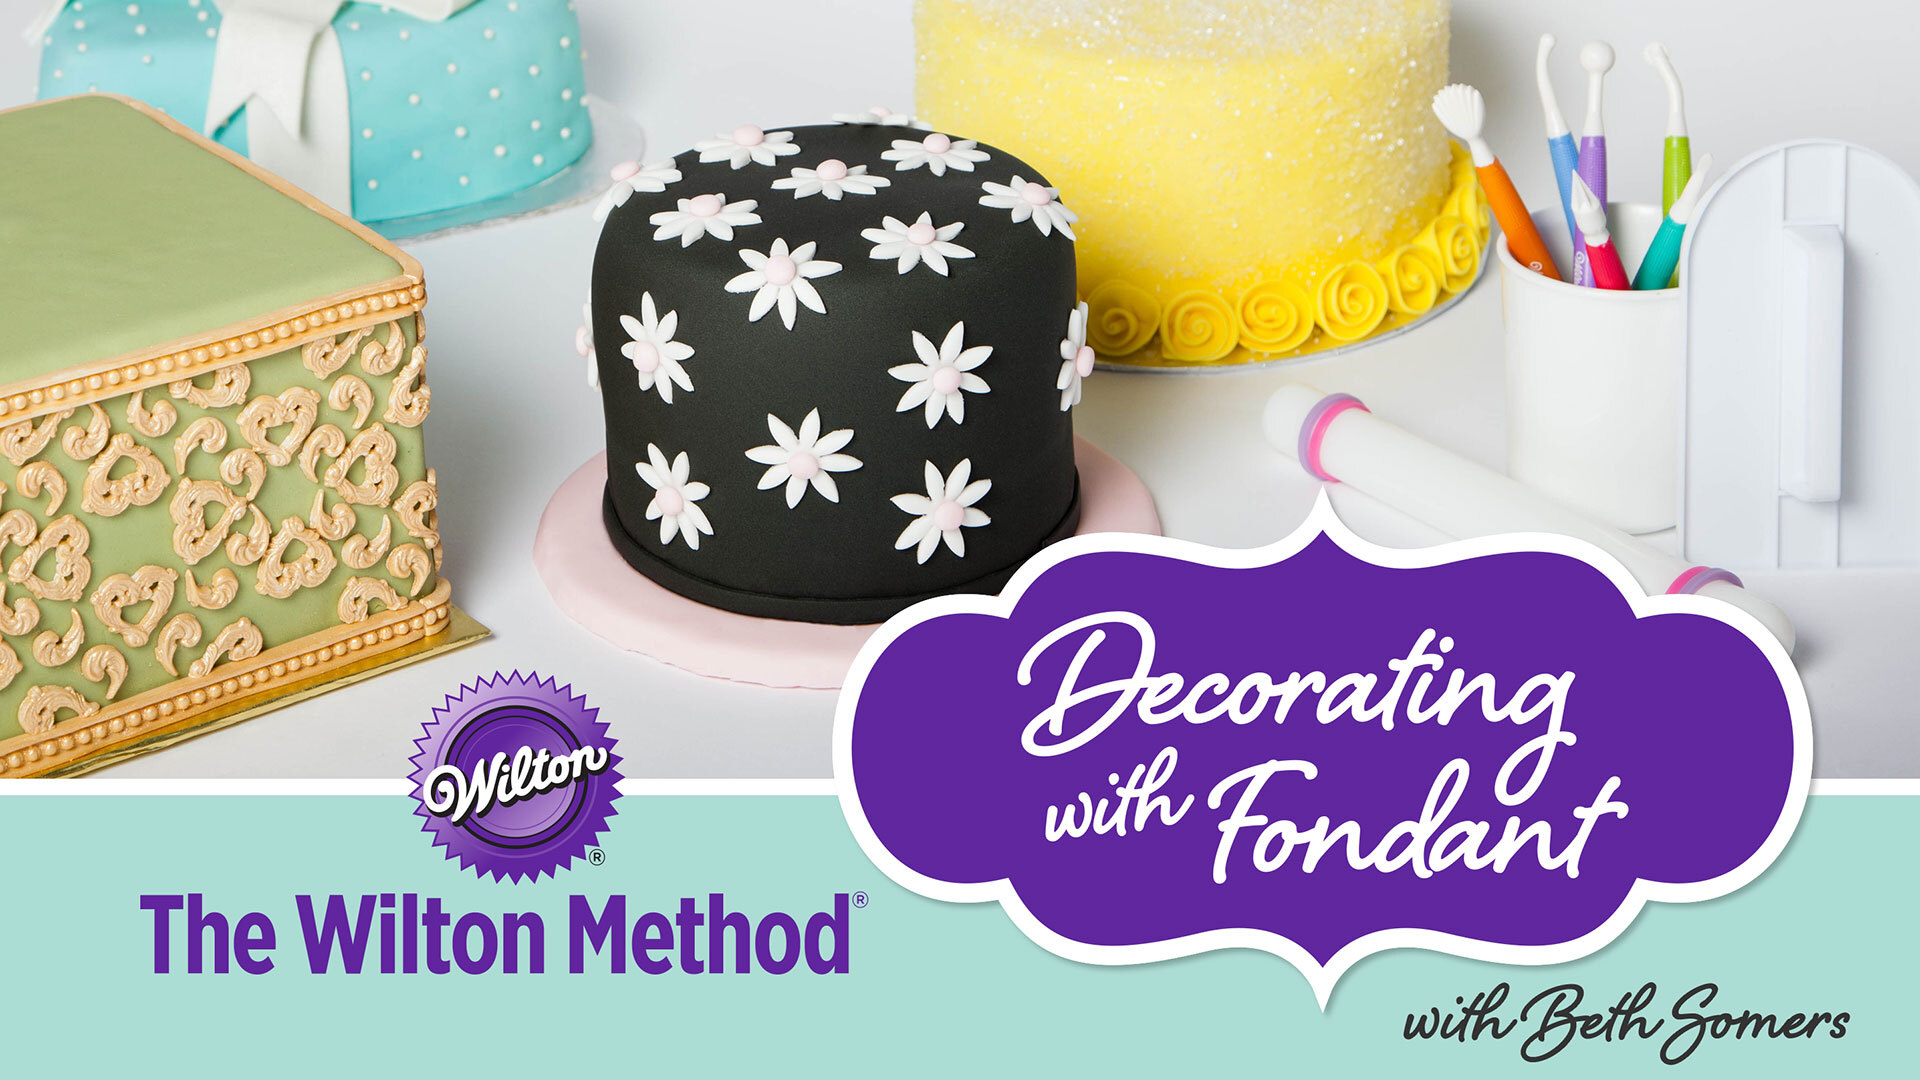 Discover Wilton's cake decorating supplies at Craftsy!